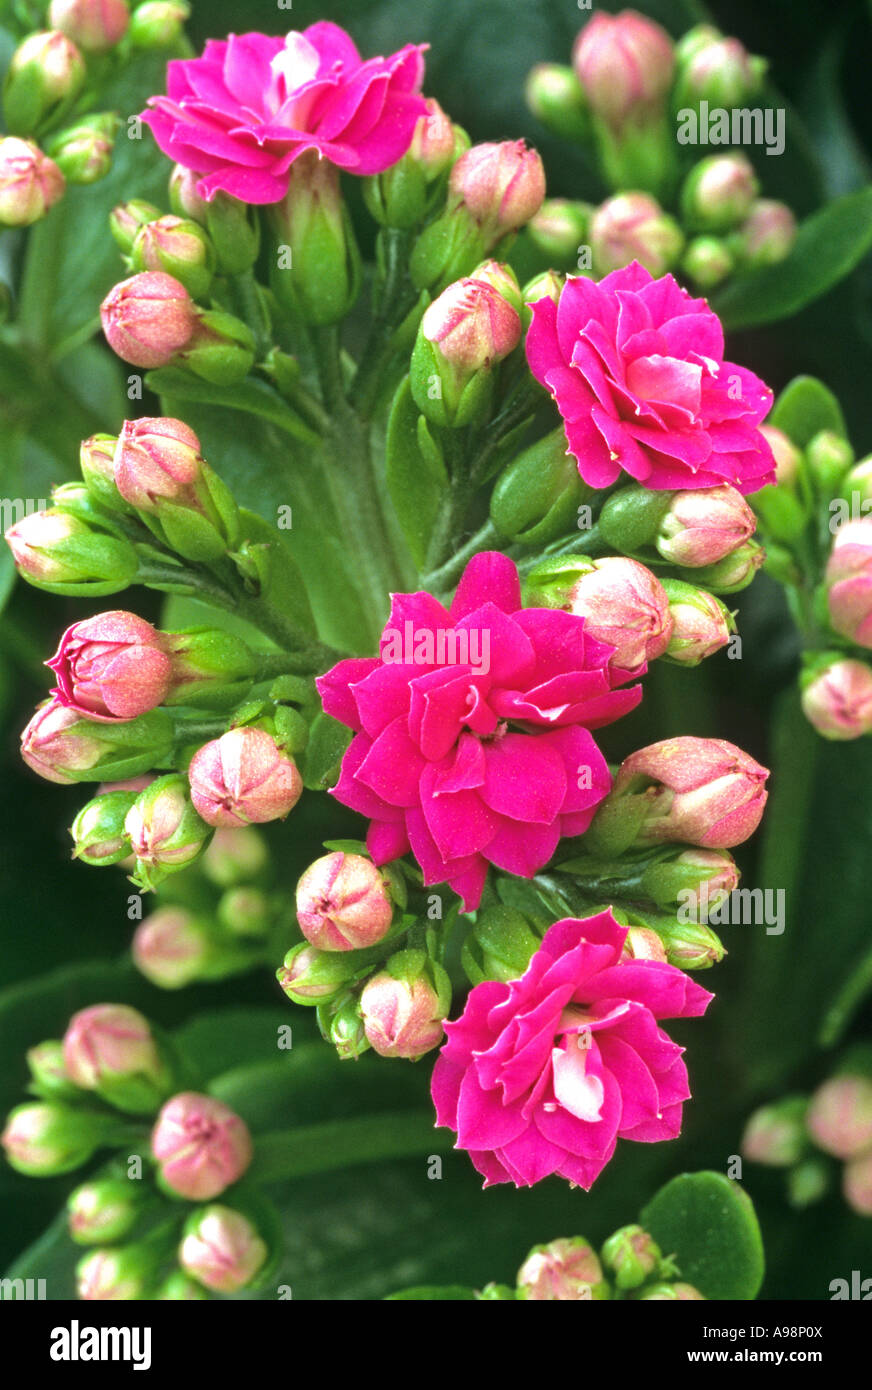 Kalanchoe blossfeldiana pink flowers Crassulaceae close up spring summer blooming Stock Photo